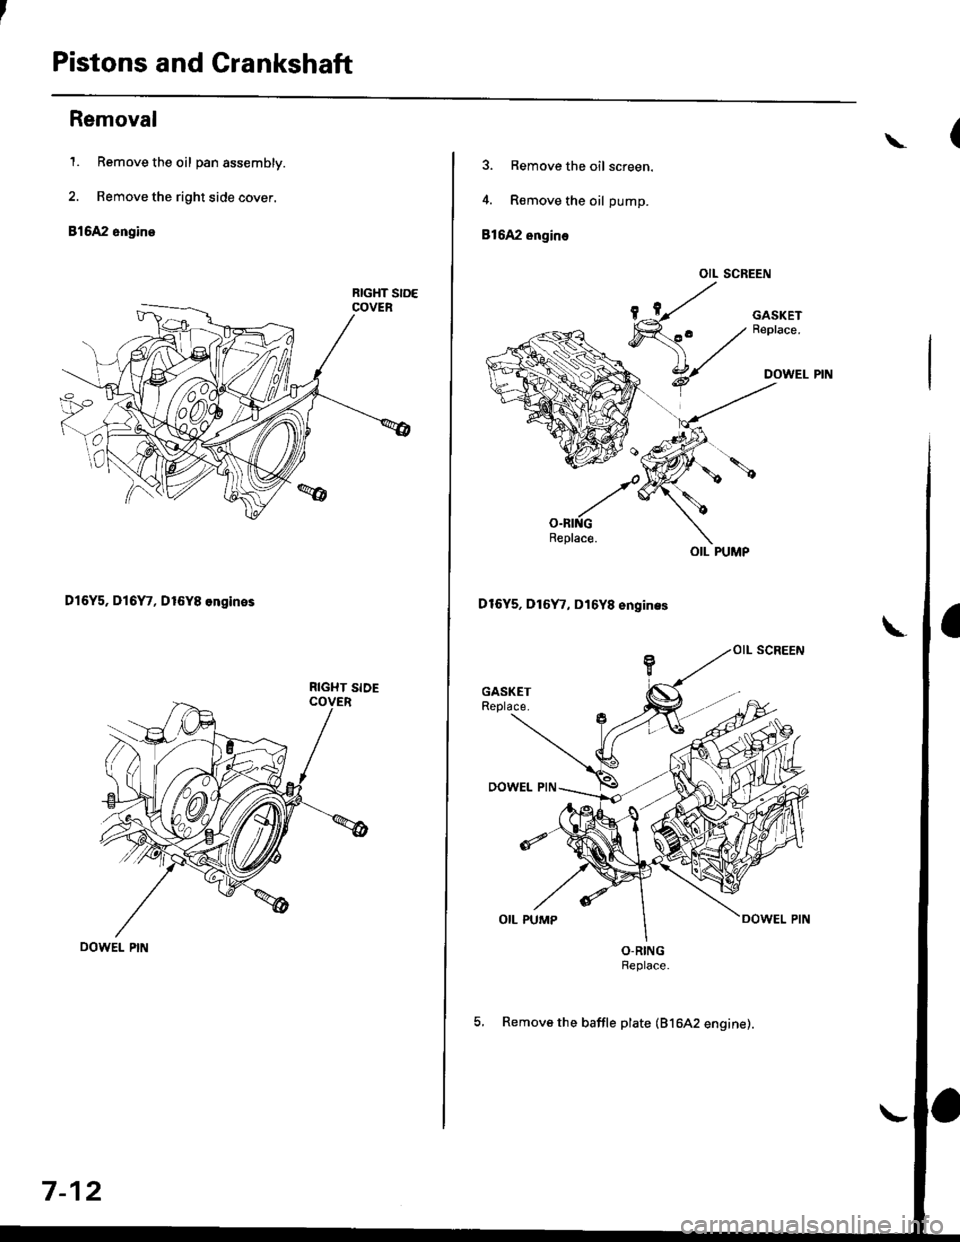 HONDA CIVIC 1996 6.G Owners Guide Pistons and Crankshaft
Removal
1. Remove the oil pan assembly.
2. Remove the right side cover.
816A2 engine
D16Y5, Dl6Y7, D16Y8 ongines
RIGHT SIDE
7-12
\
3. Remove the oil screen.
4. R€move the oil 